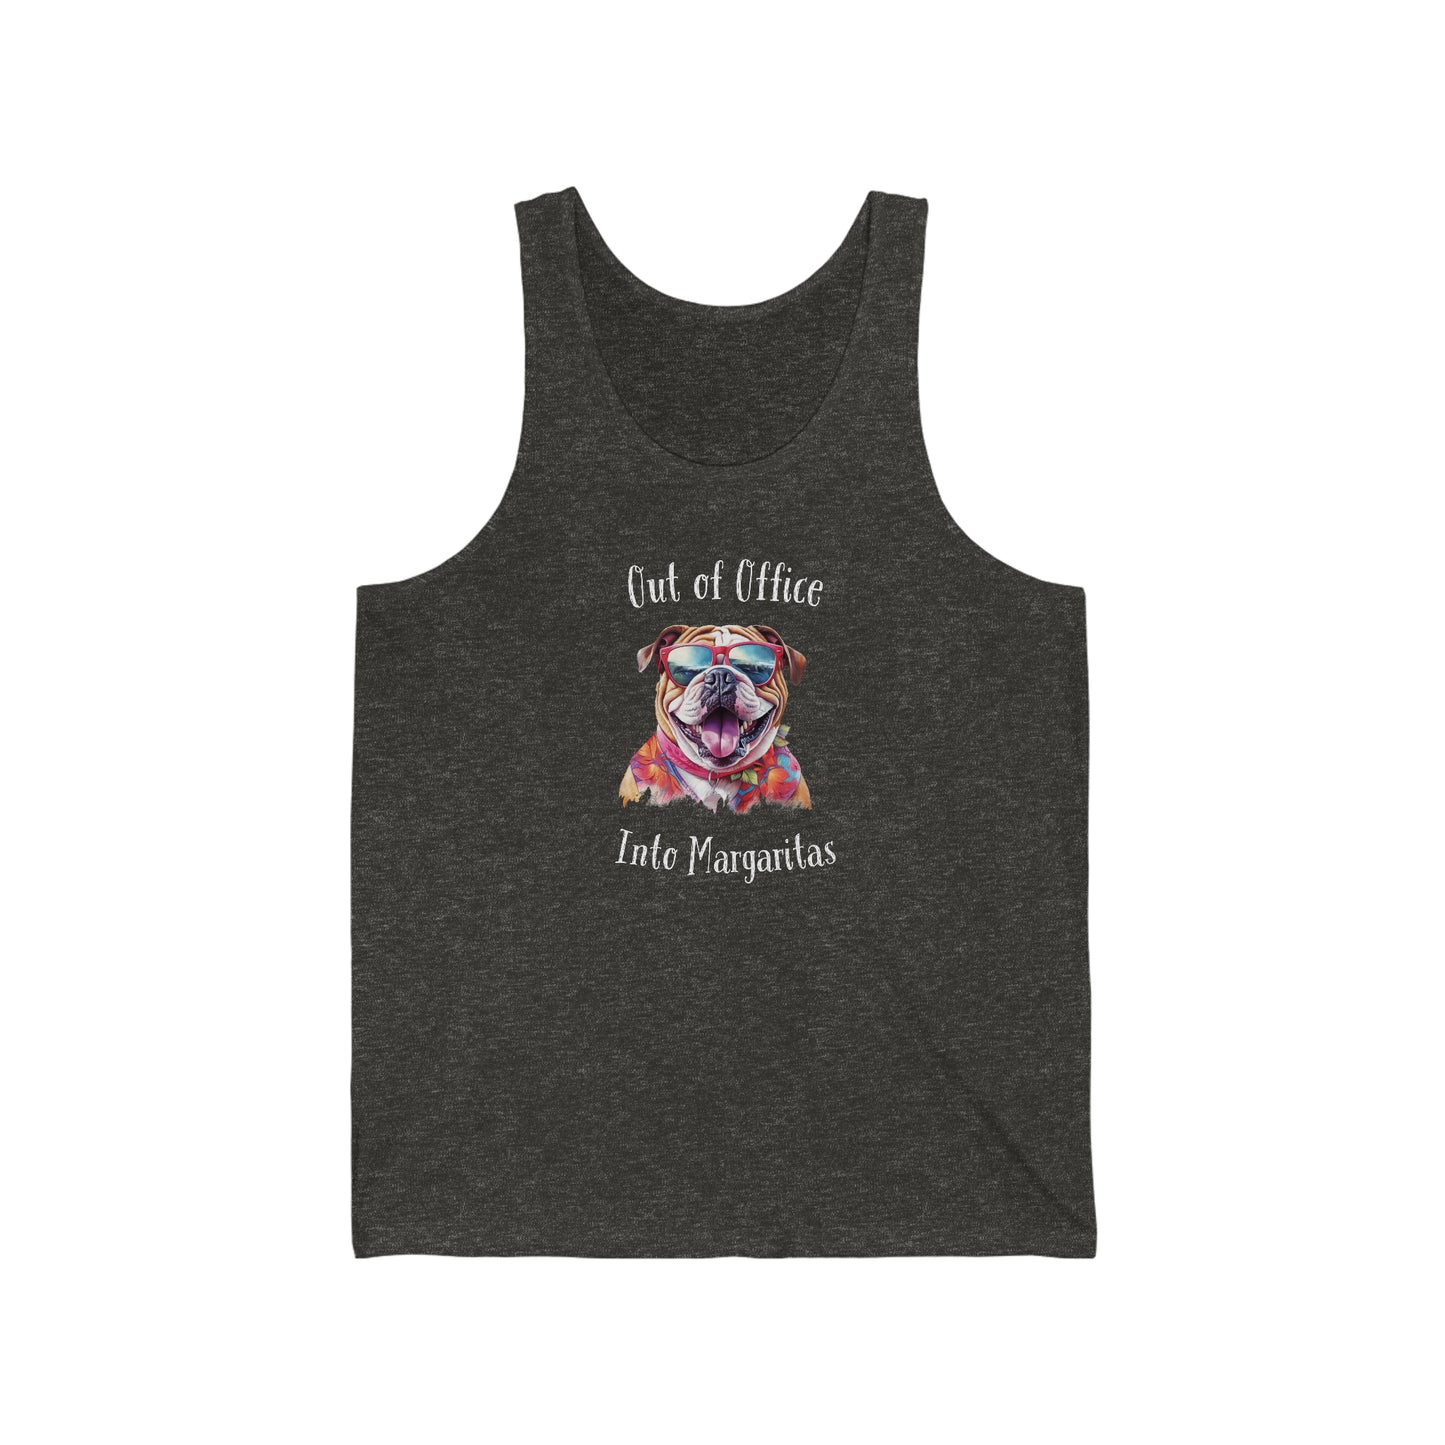 Out of Office - Bulldog Tank Top